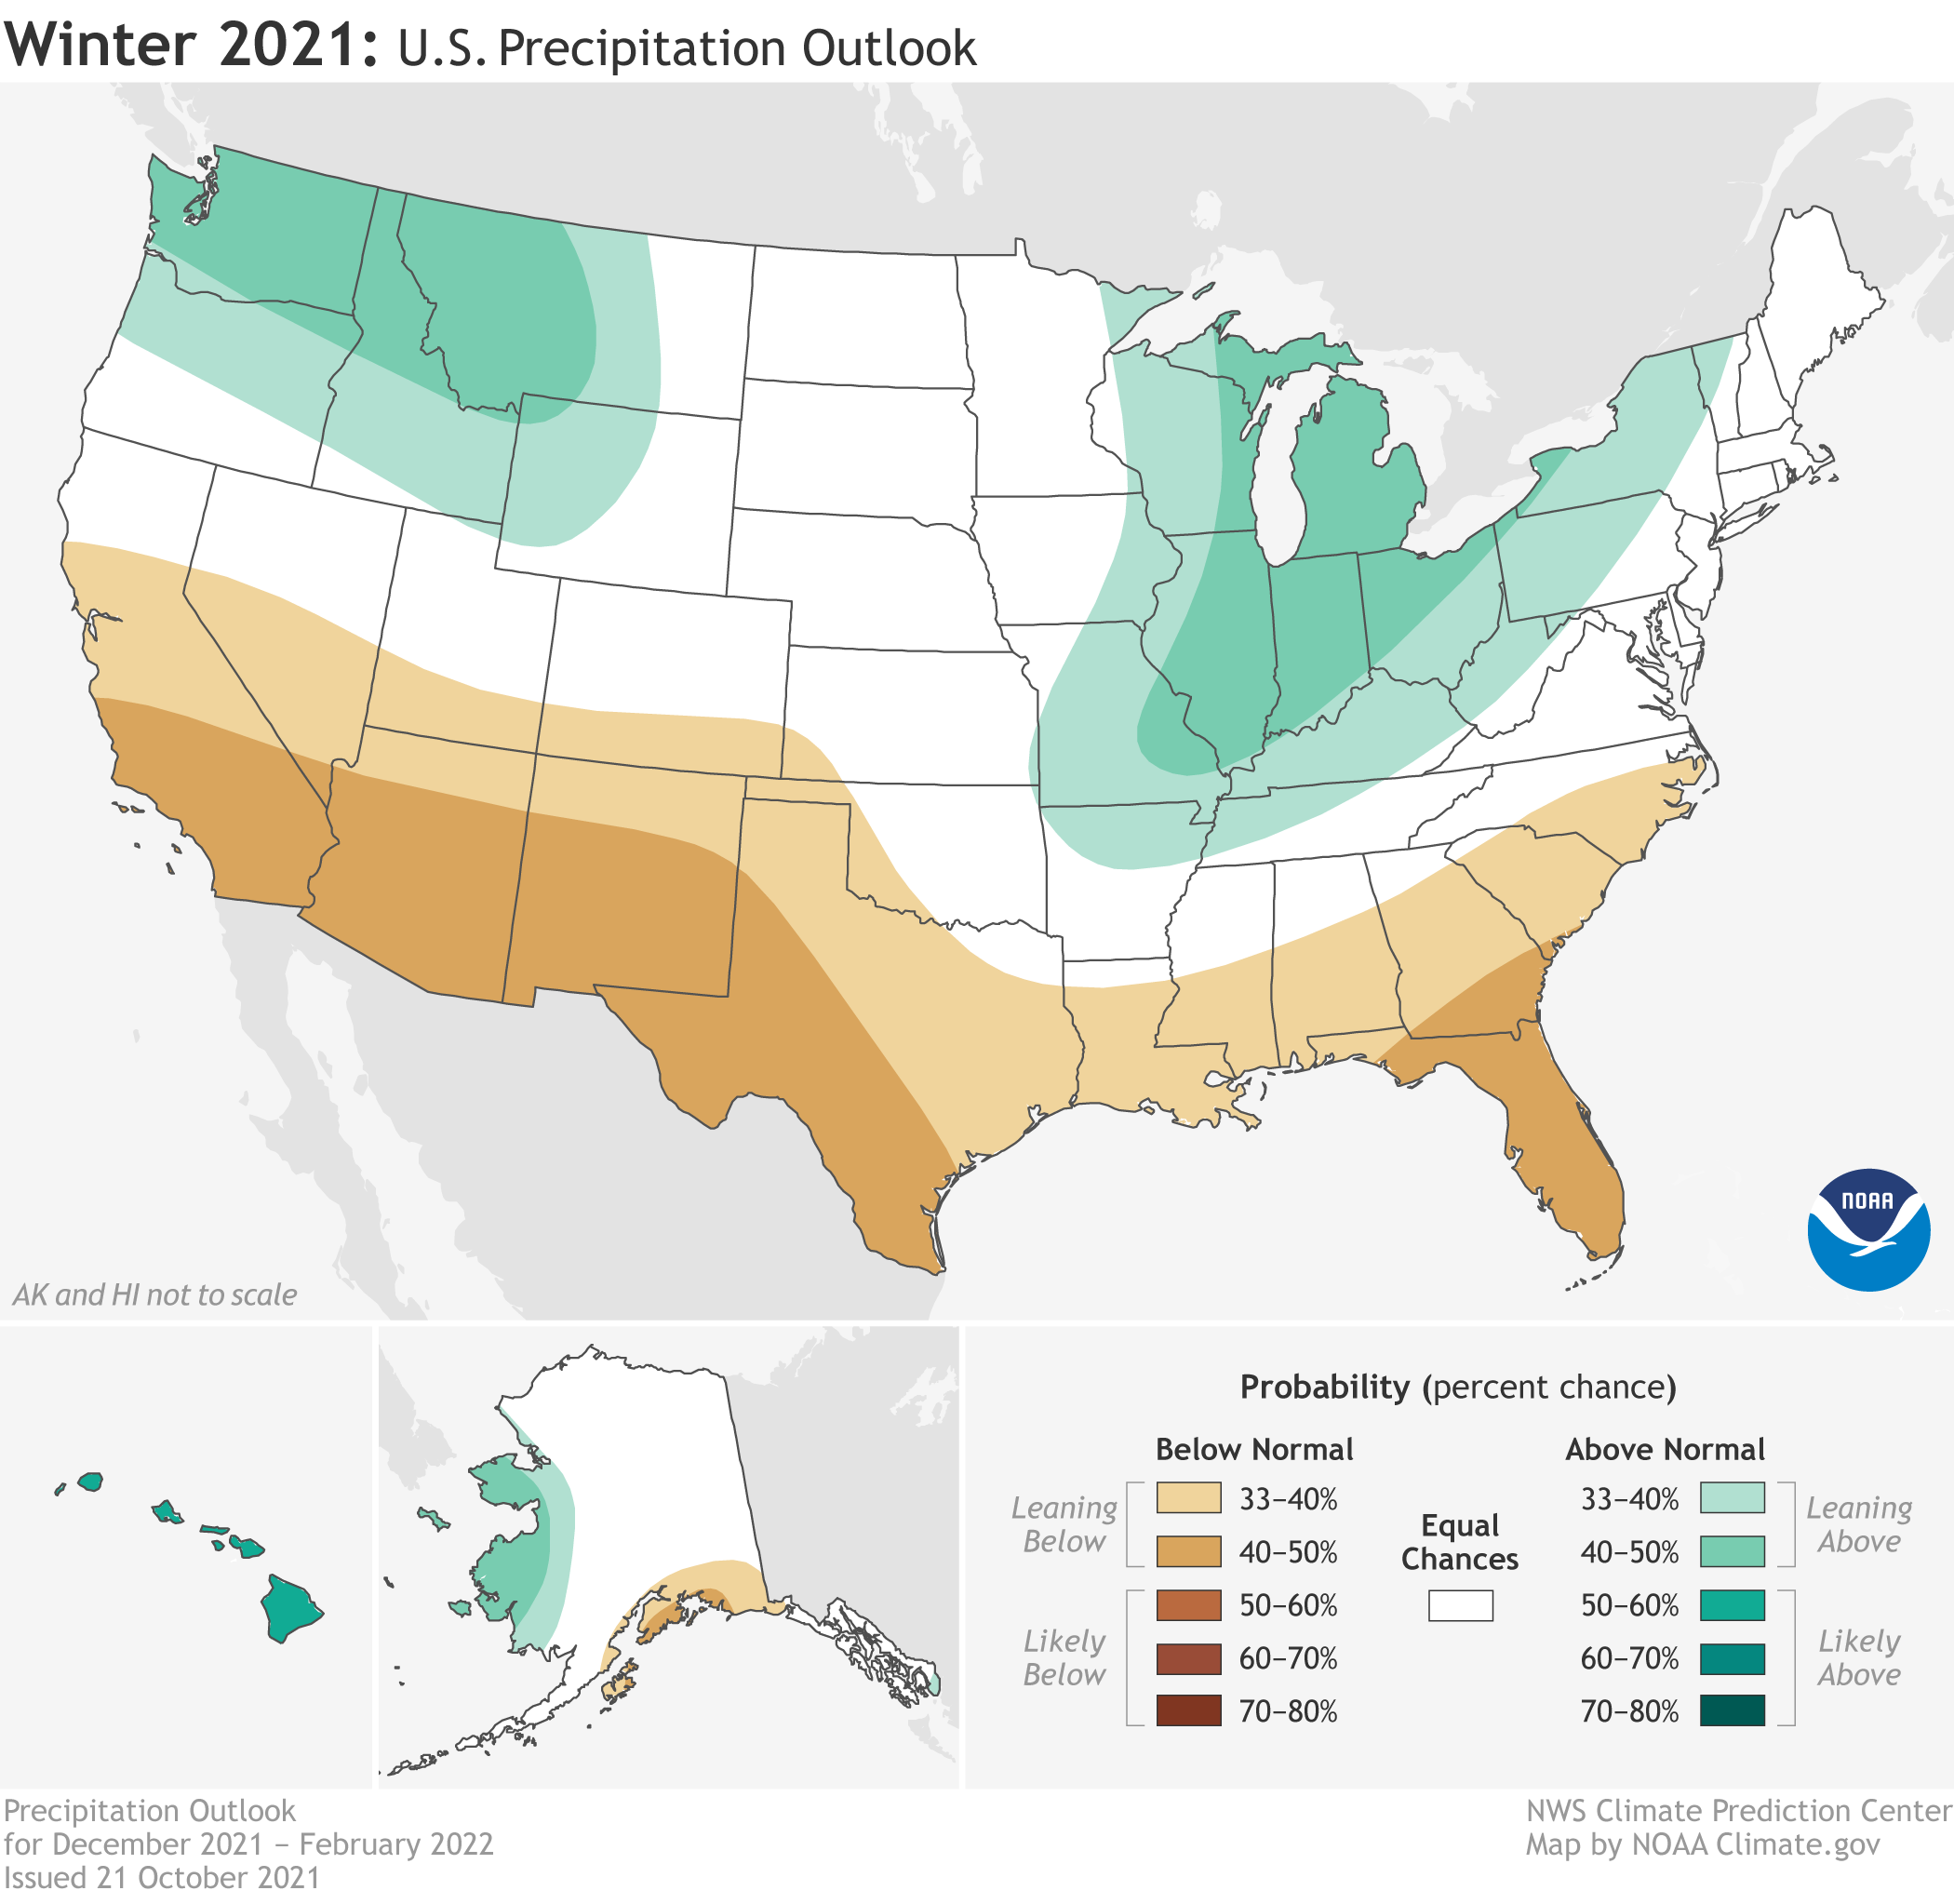 Map of U.S. precipitation outlook for 2021-22 winter